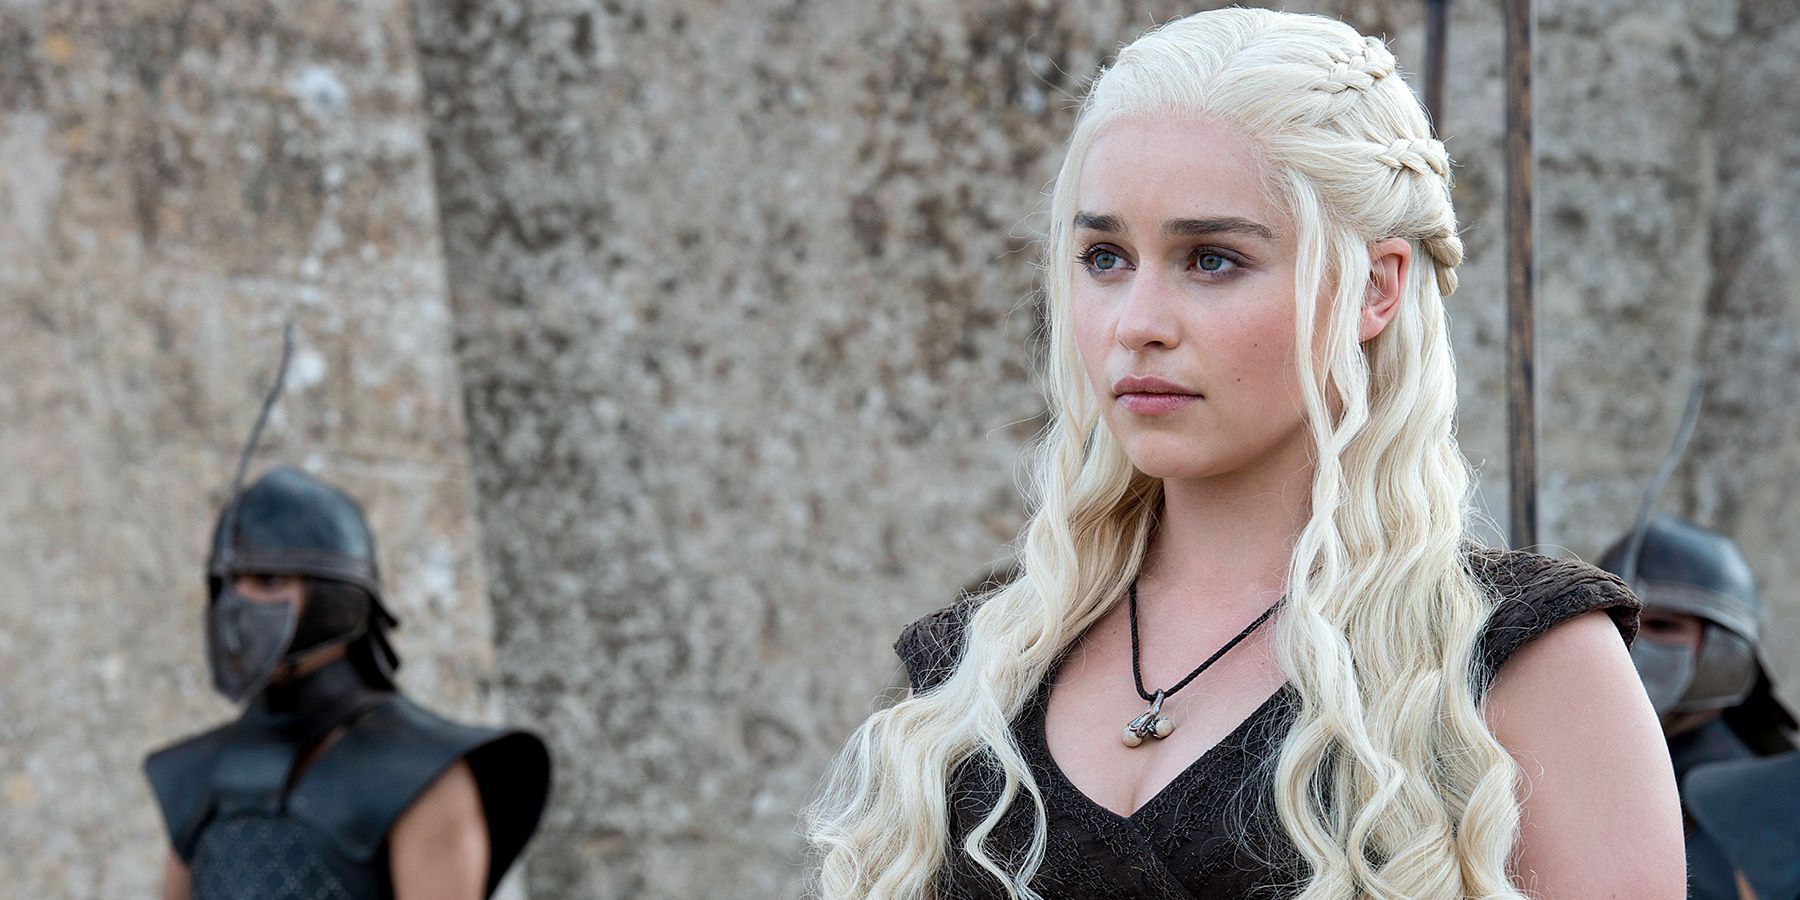 Game Of Thrones' Emilia Clarke Refuses To Watch House Of The
Dragon